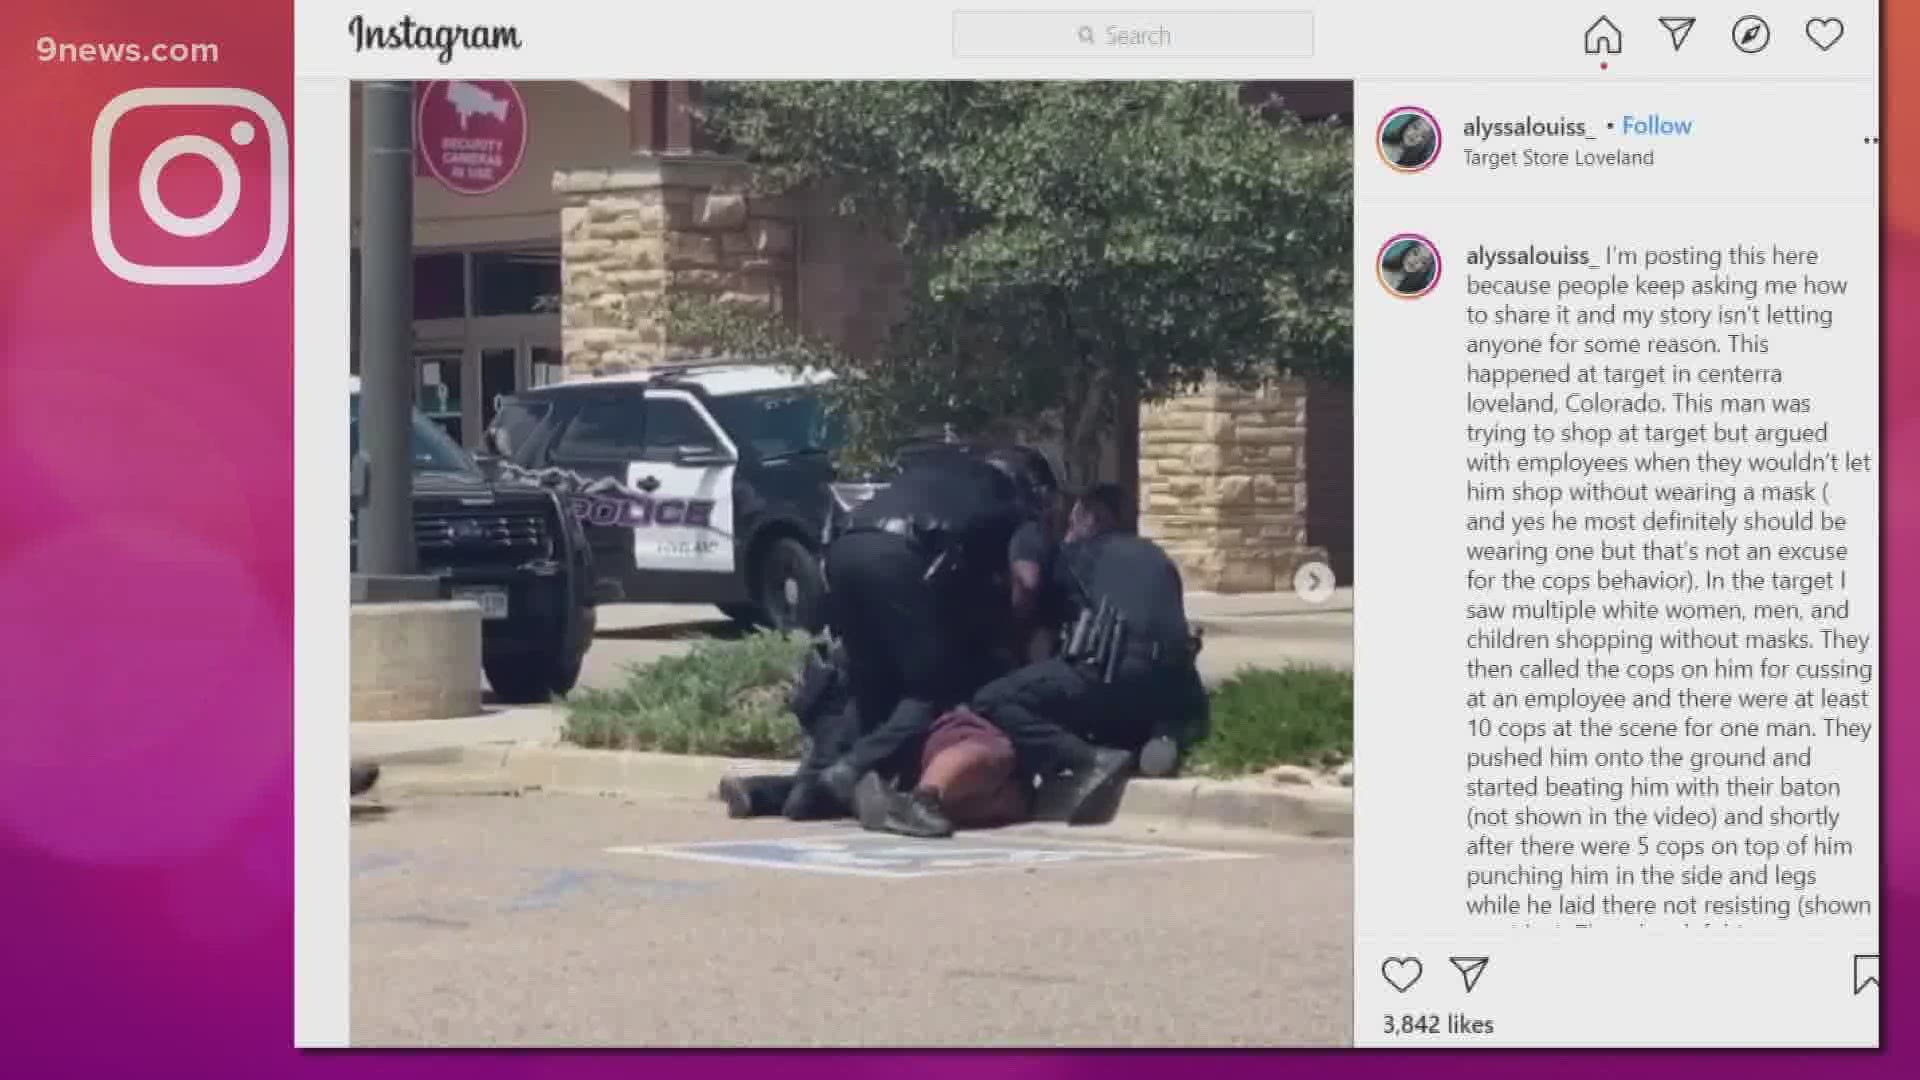 The person who posted video of the arrest on Instagram said police were called because the man was not wearing a mask and arguing with store employees.